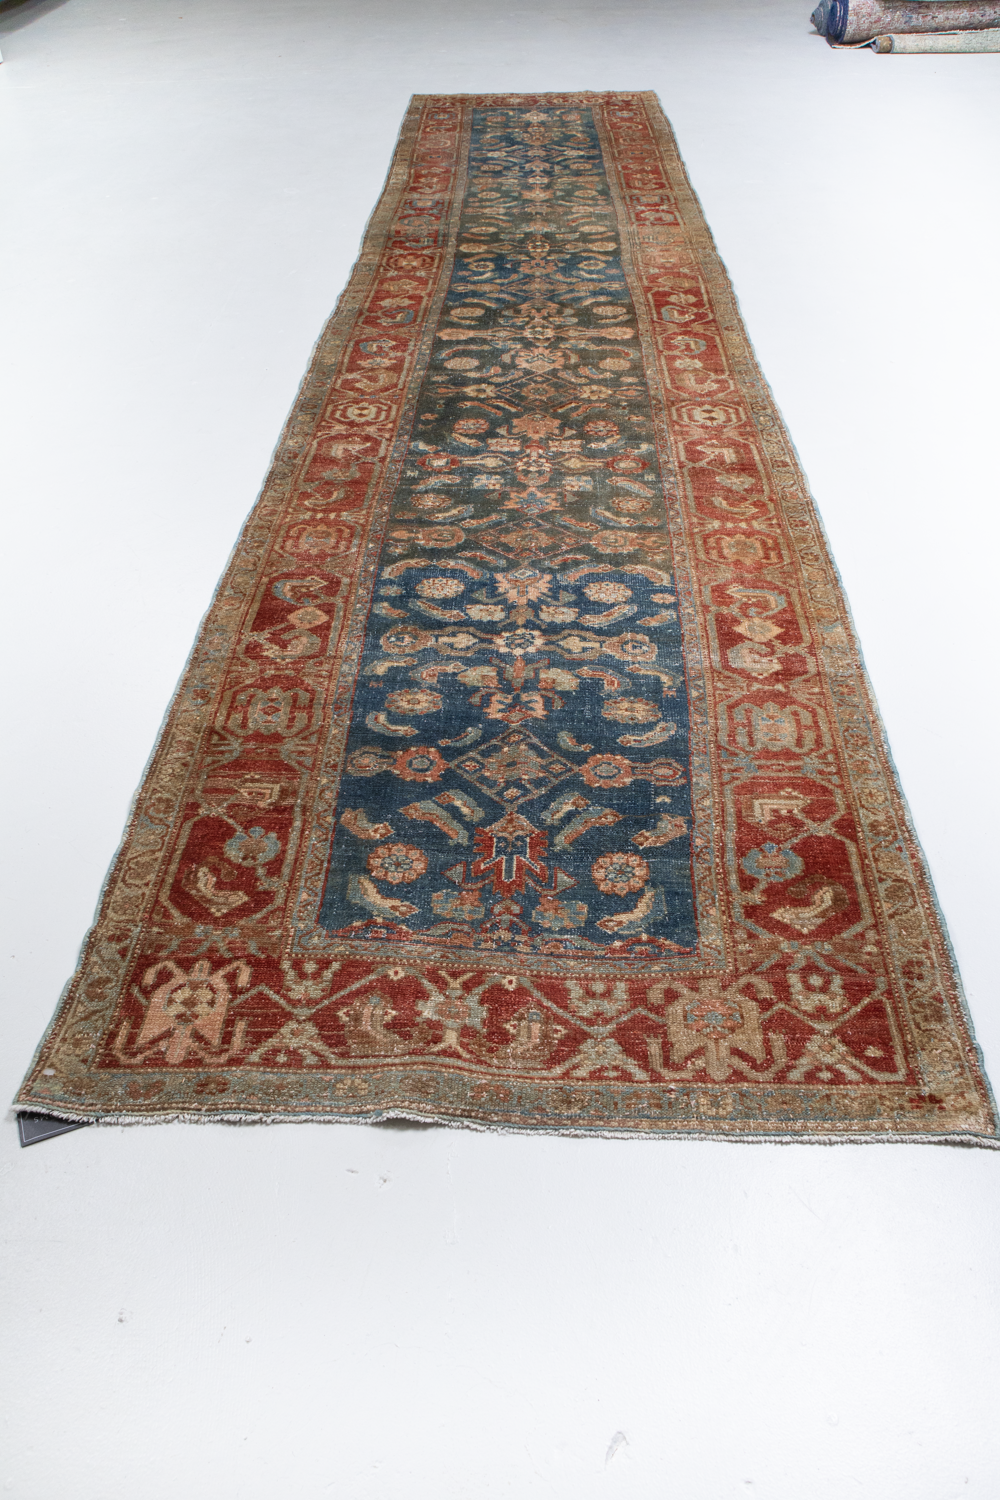 Heir Looms Antique Persian Malayer Rug